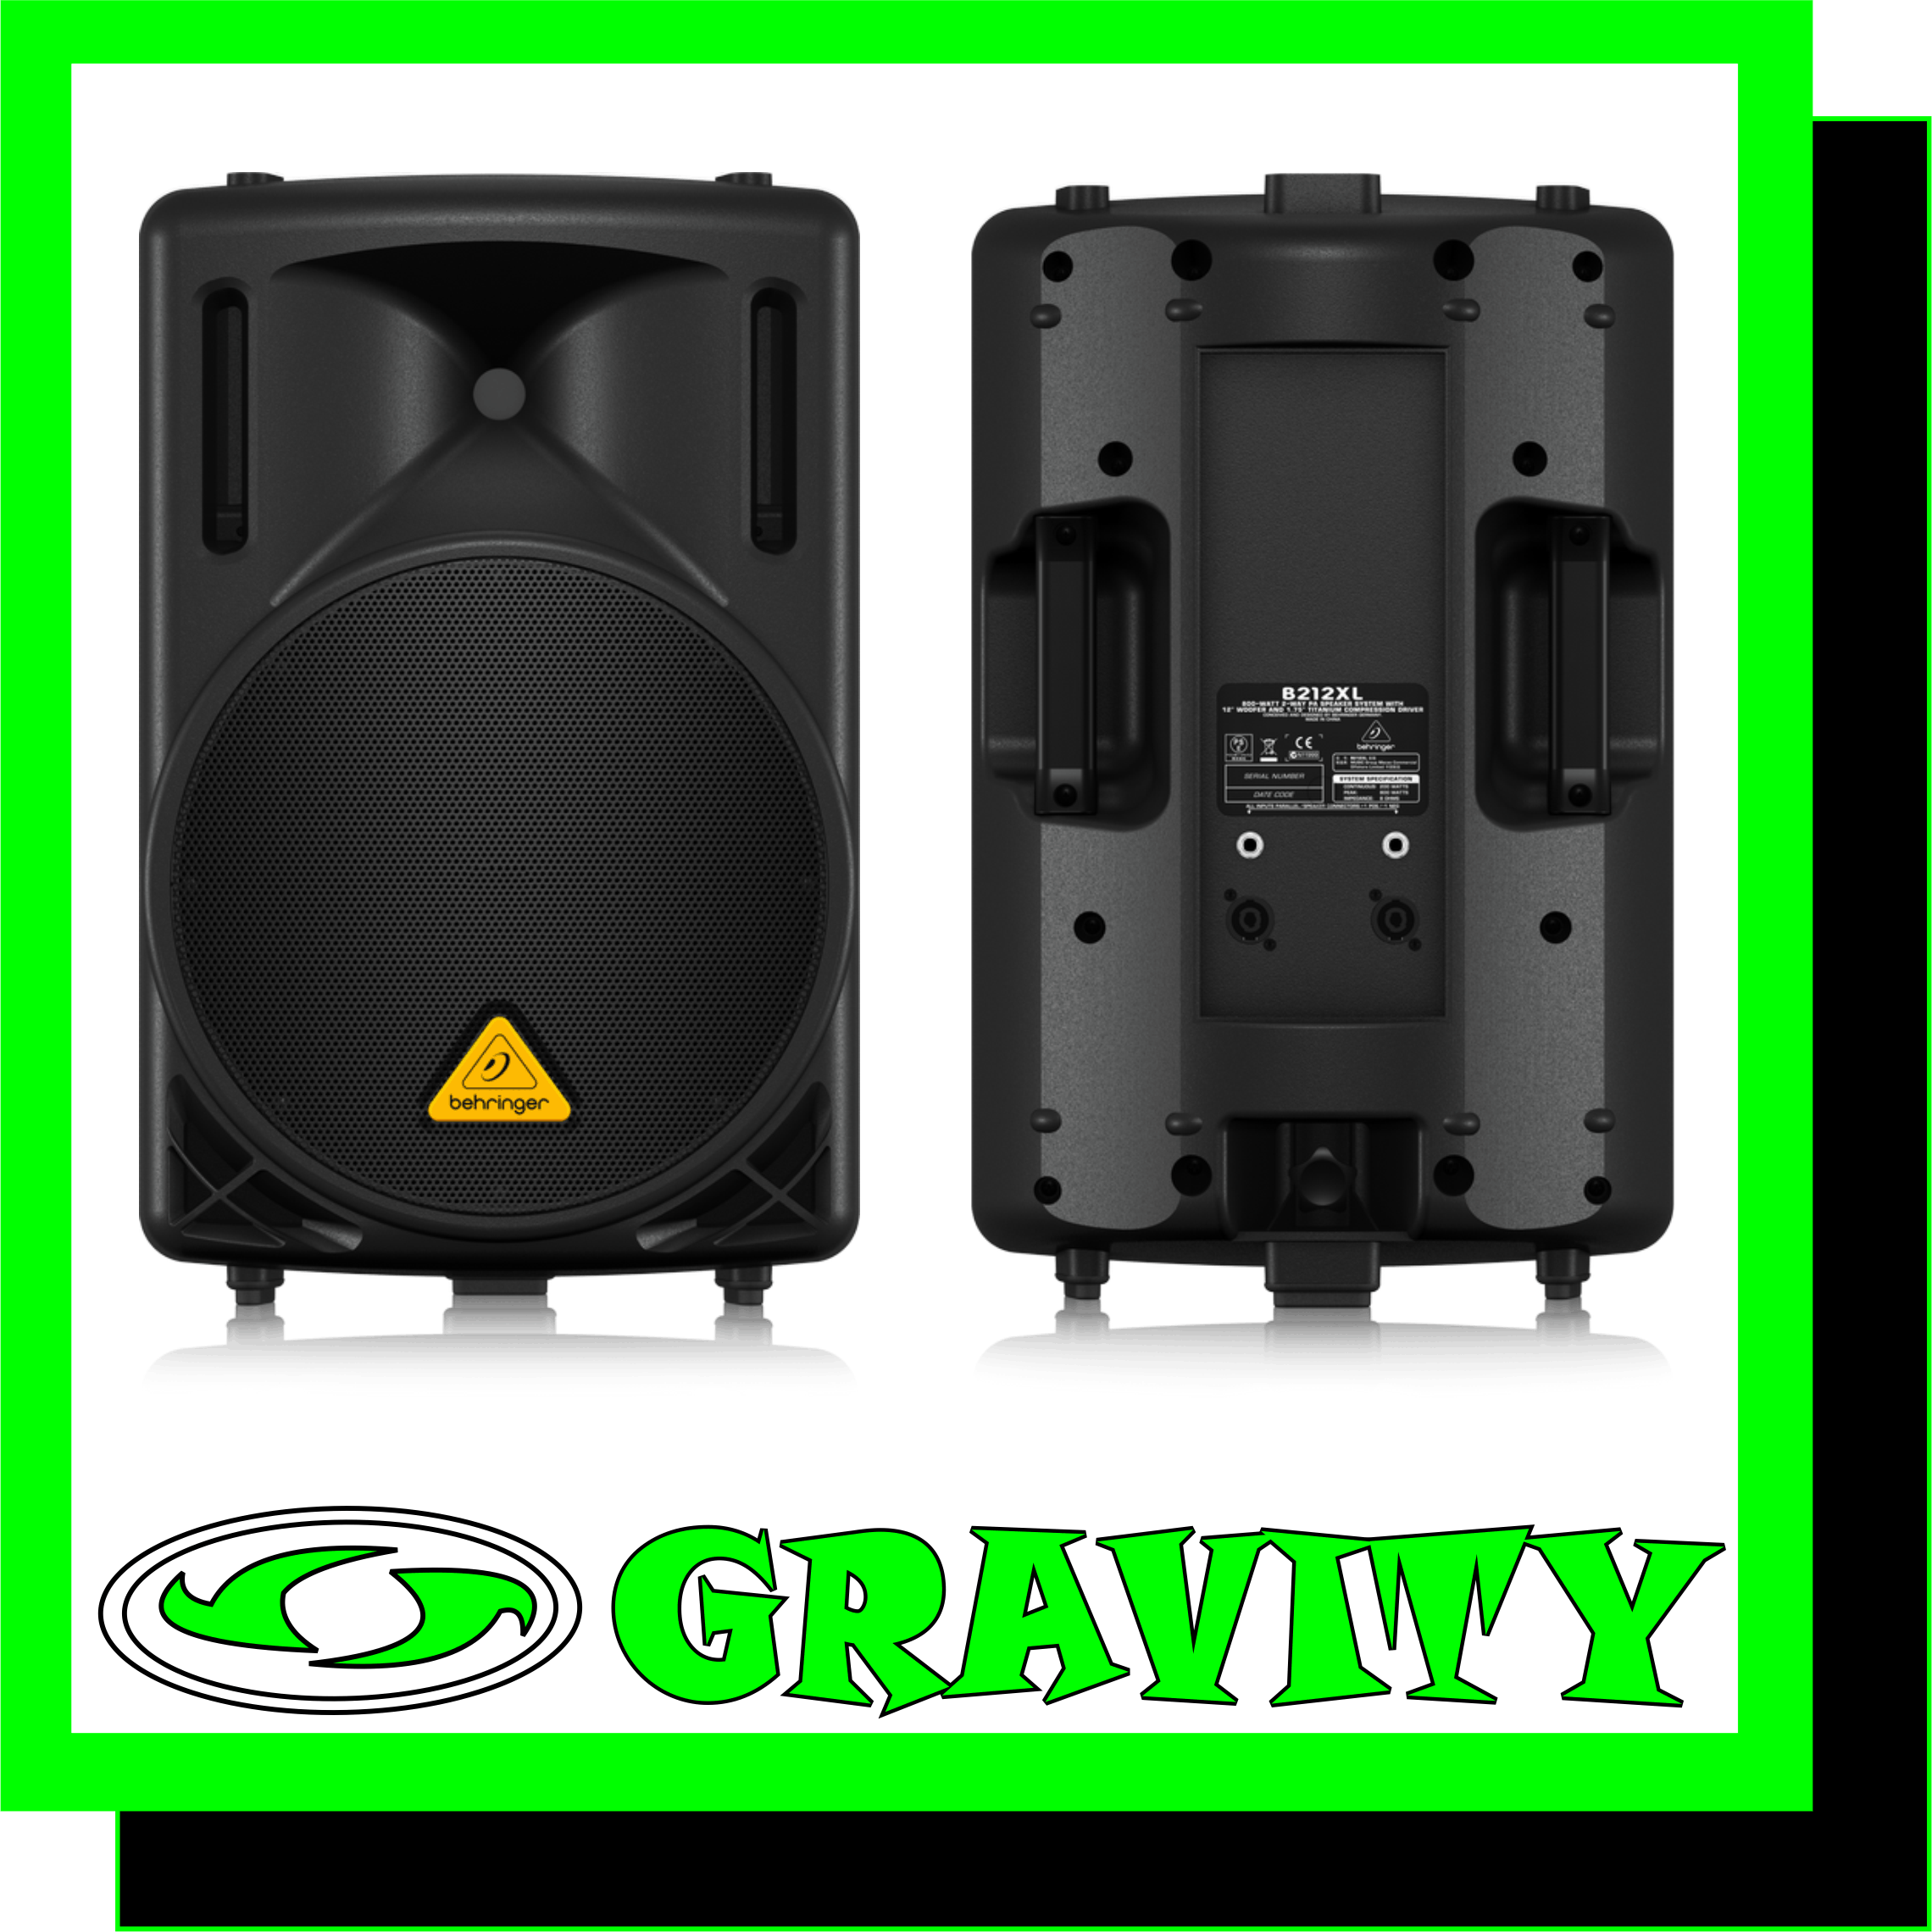 EUROLIVE B212XL 800-Watt 2-Way PA Speaker System with 12" Woofer and 1.75" Titanium Compression Driver   -High-power 2-way PA sound reinforcement speaker system for live and playback applications (200 Watts Continuous / 800 Watts Peak Power) -Ultra-compact and light weight system delivers excellent sound even at extreme sound pressure levels -Extremely powerful 12'' long-excursion driver provides incredibly deep bass and acoustic power -State-of-the-art 1.75'' titanium-diaphragm compression driver for exceptional high-frequency reproduction -Ultra-wide dispersion, large-format exponential horn -Overload-protection circuitry ensures optimal HF driver protection -Versatile trapezoidal enclosure design allows different positioning:  - Stand mounting with 35-mm pole socket  - Tilts on its side for use as a floor monitor -Ergonomically shaped handles for easy carrying and setup -2 professional speaker connectors plus ¼'' jack connectors